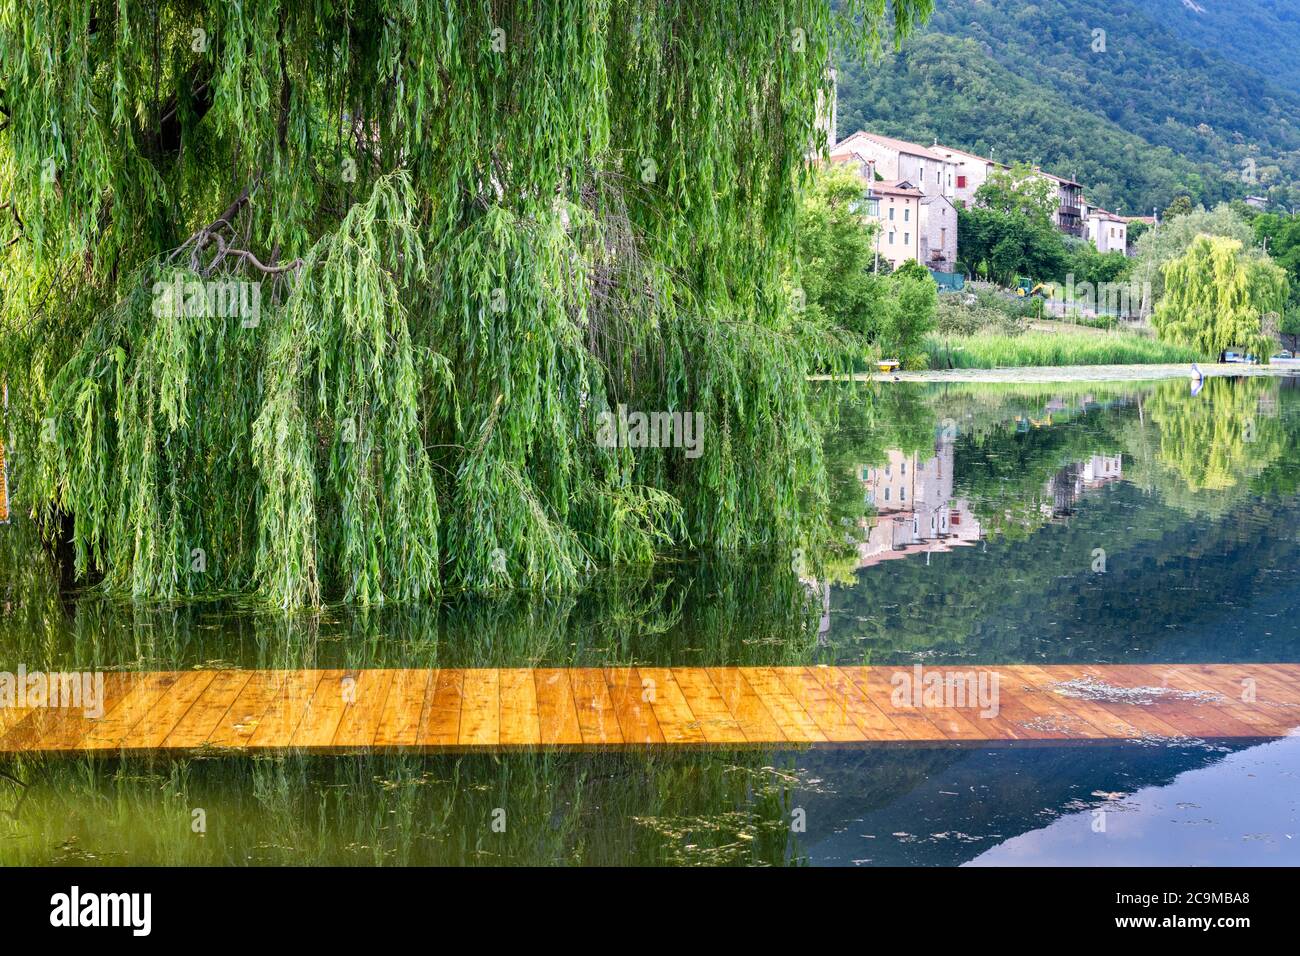 Village and willow reflecting on the lake with the pier submerged in the water. View from the shore of Lago di Lago, Revine Lago, Treviso, Italy Stock Photo